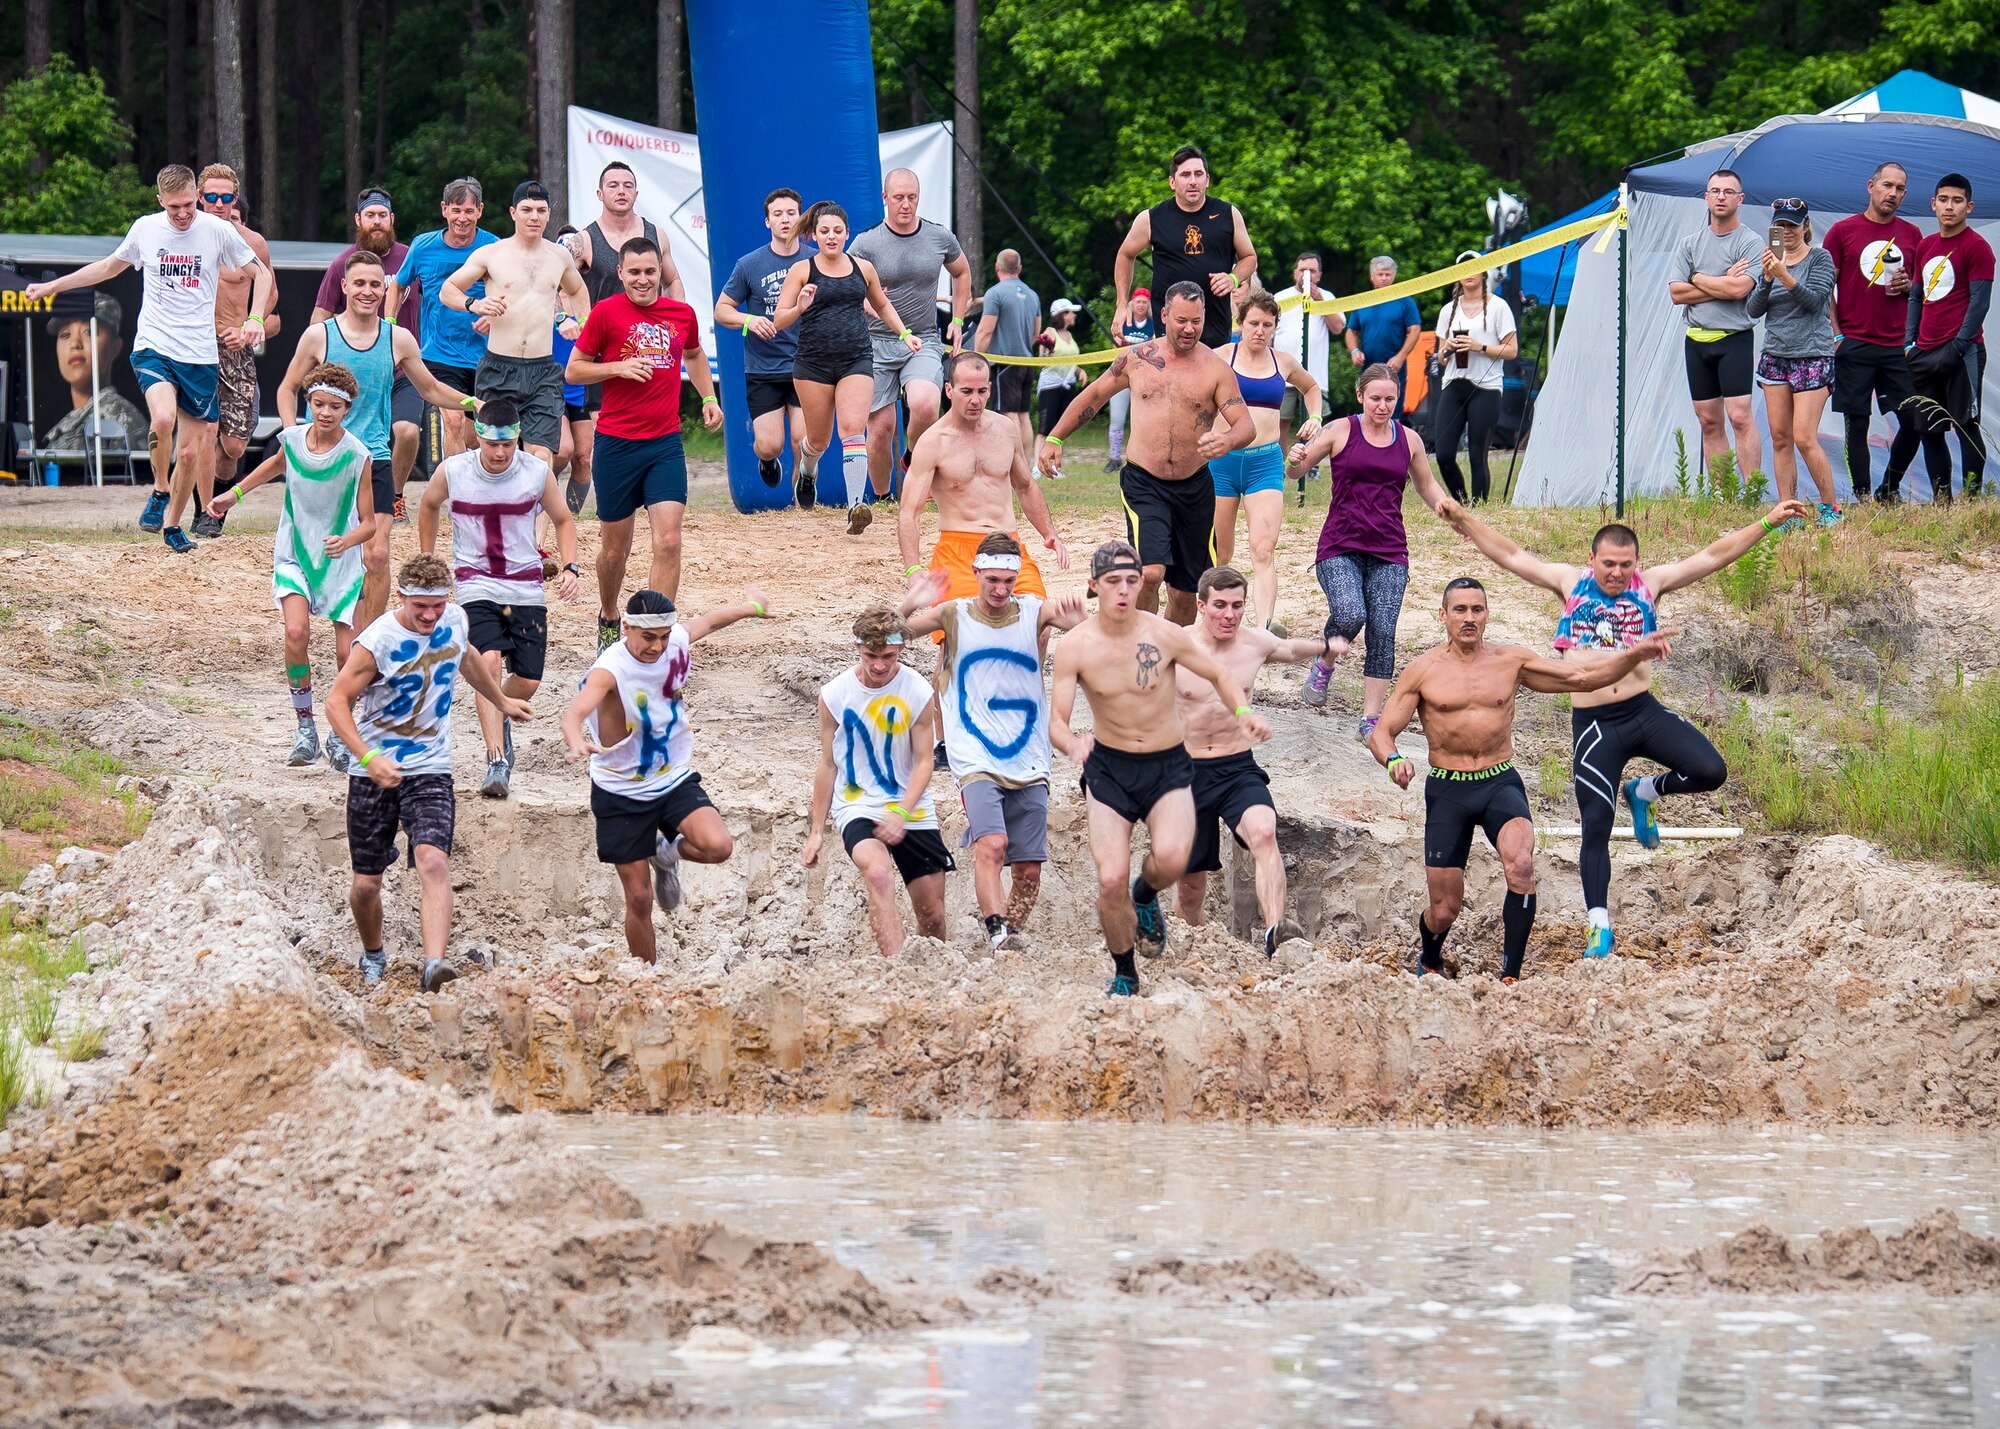 Moody Mud run participants start the race, May 4, 2019, in Ray City, Ga. The sixth annual Mud Run had approximately 850 participants who had to overcome a series of obstacles on the 4 and 5-mile courses. The 32-obstacle course gave Airmen, families and the local community an opportunity to build camaraderie and teamwork skills. (U.S. Air Force photo by Airman 1st Class Eugene Oliver)